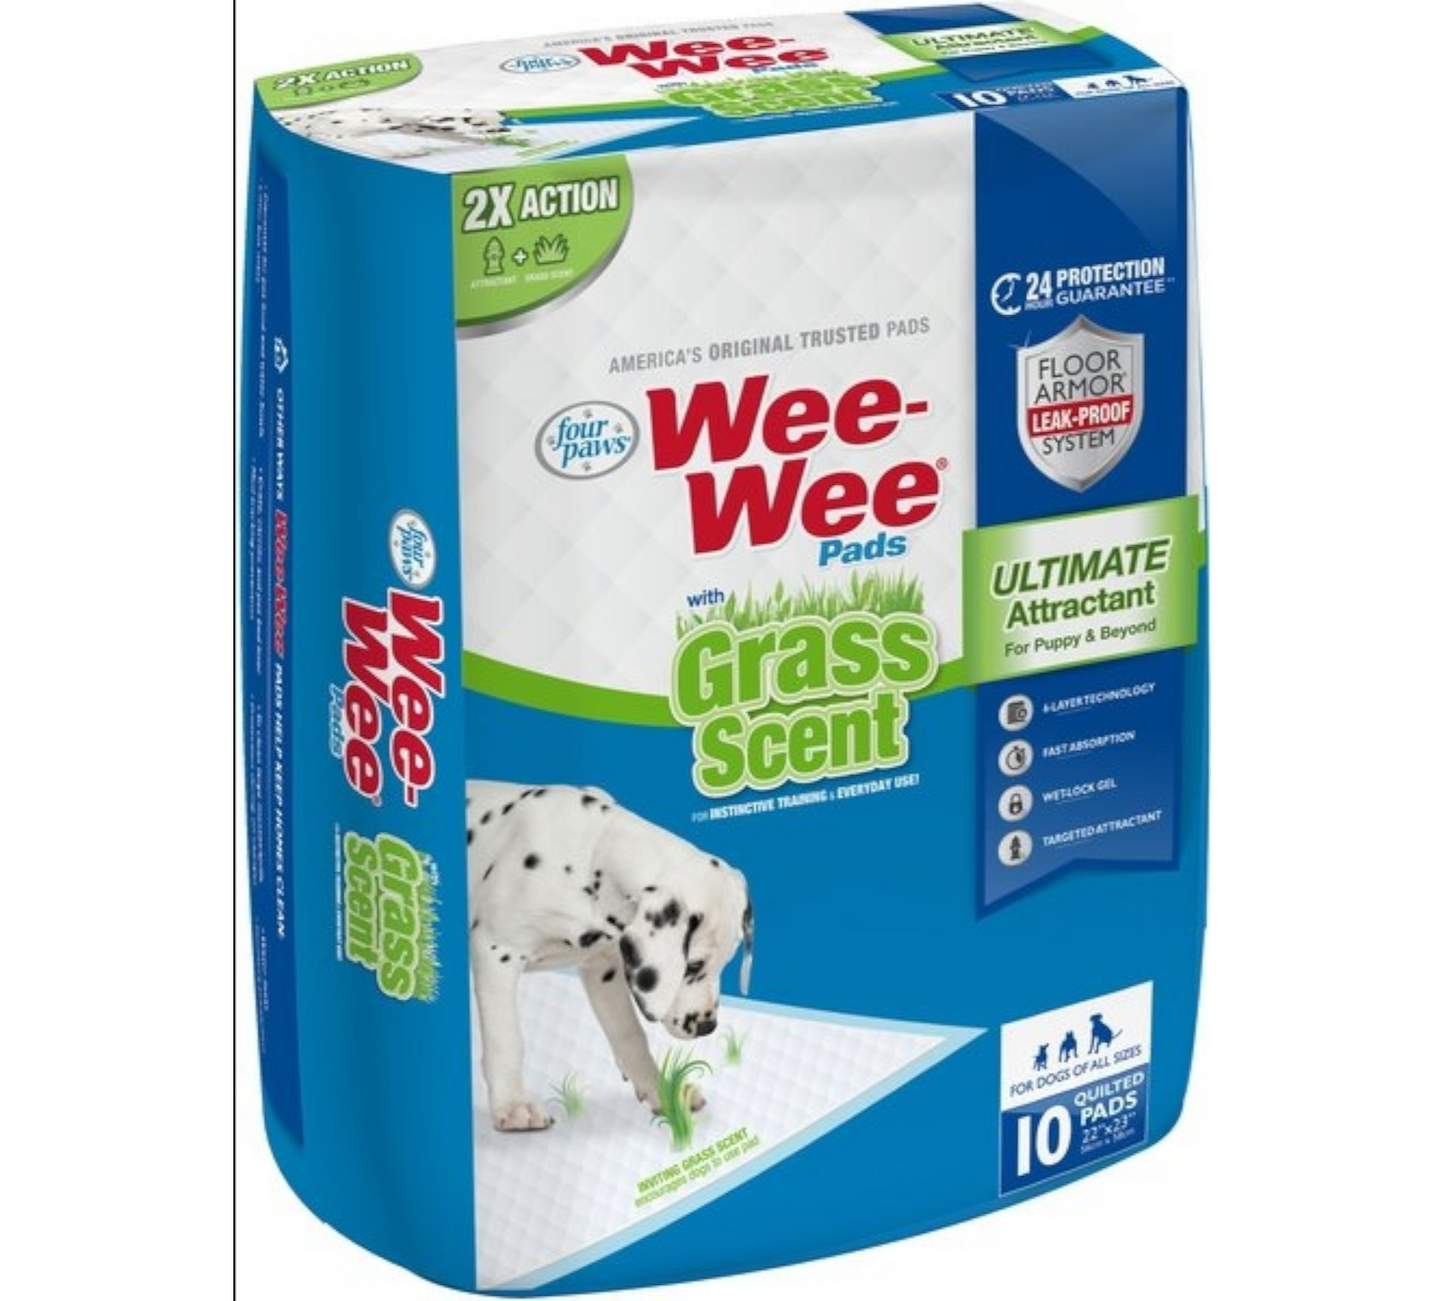 Four Paws Wee-Wee Grass Scented Puppy Pads